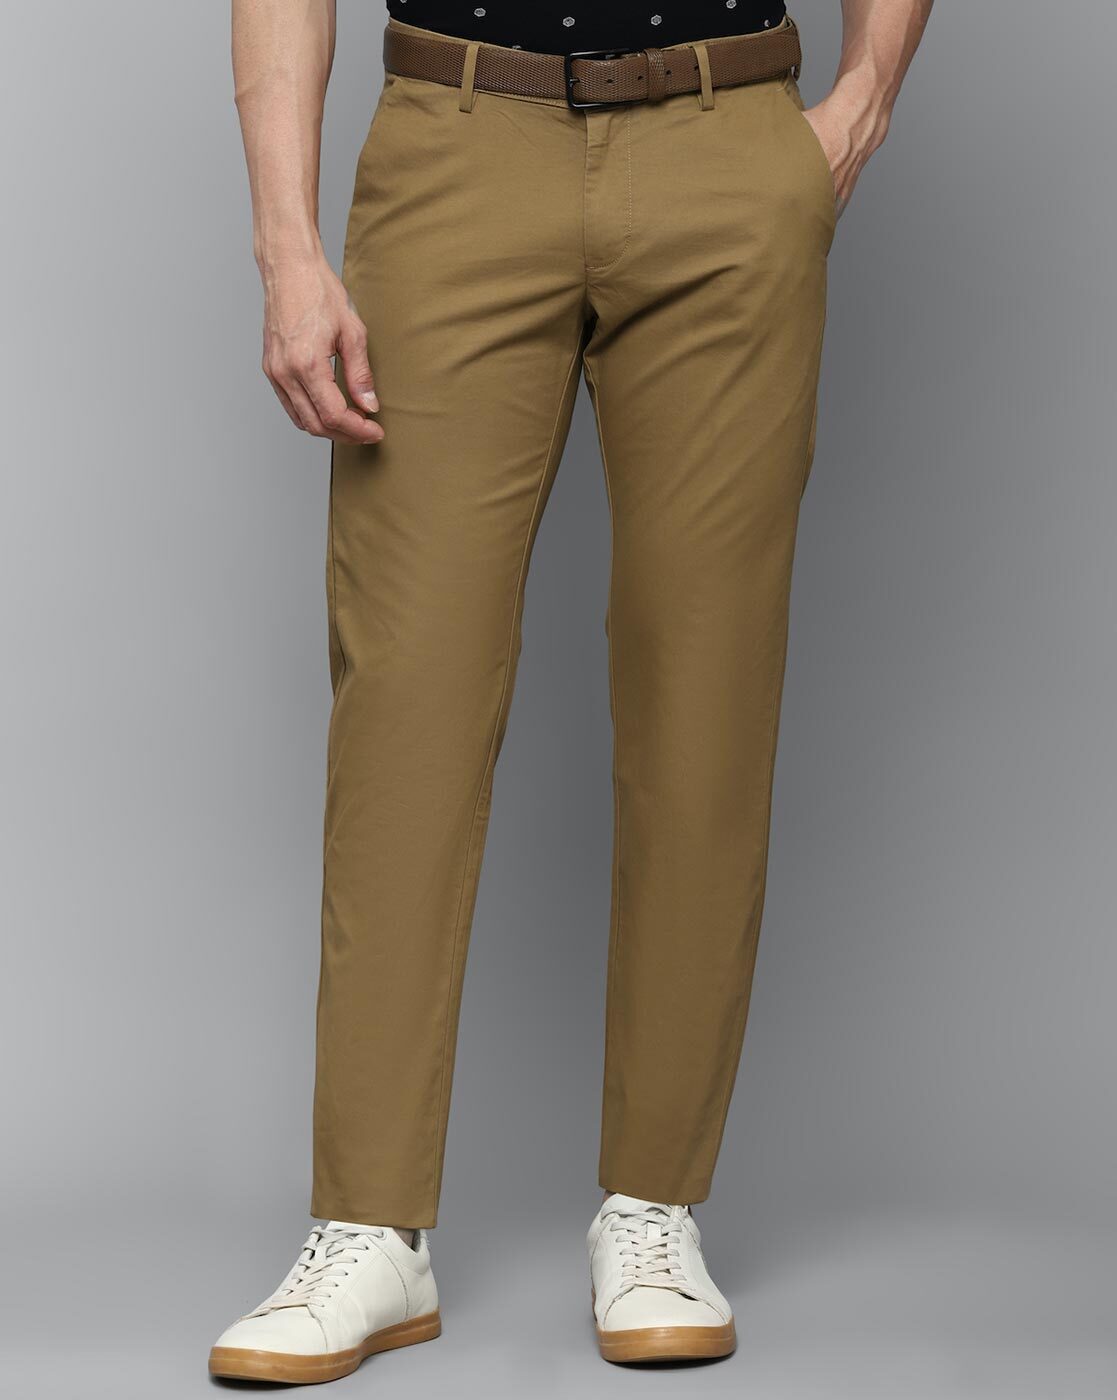 Buy allen solly woman formal trousers in trousers in India @ Limeroad